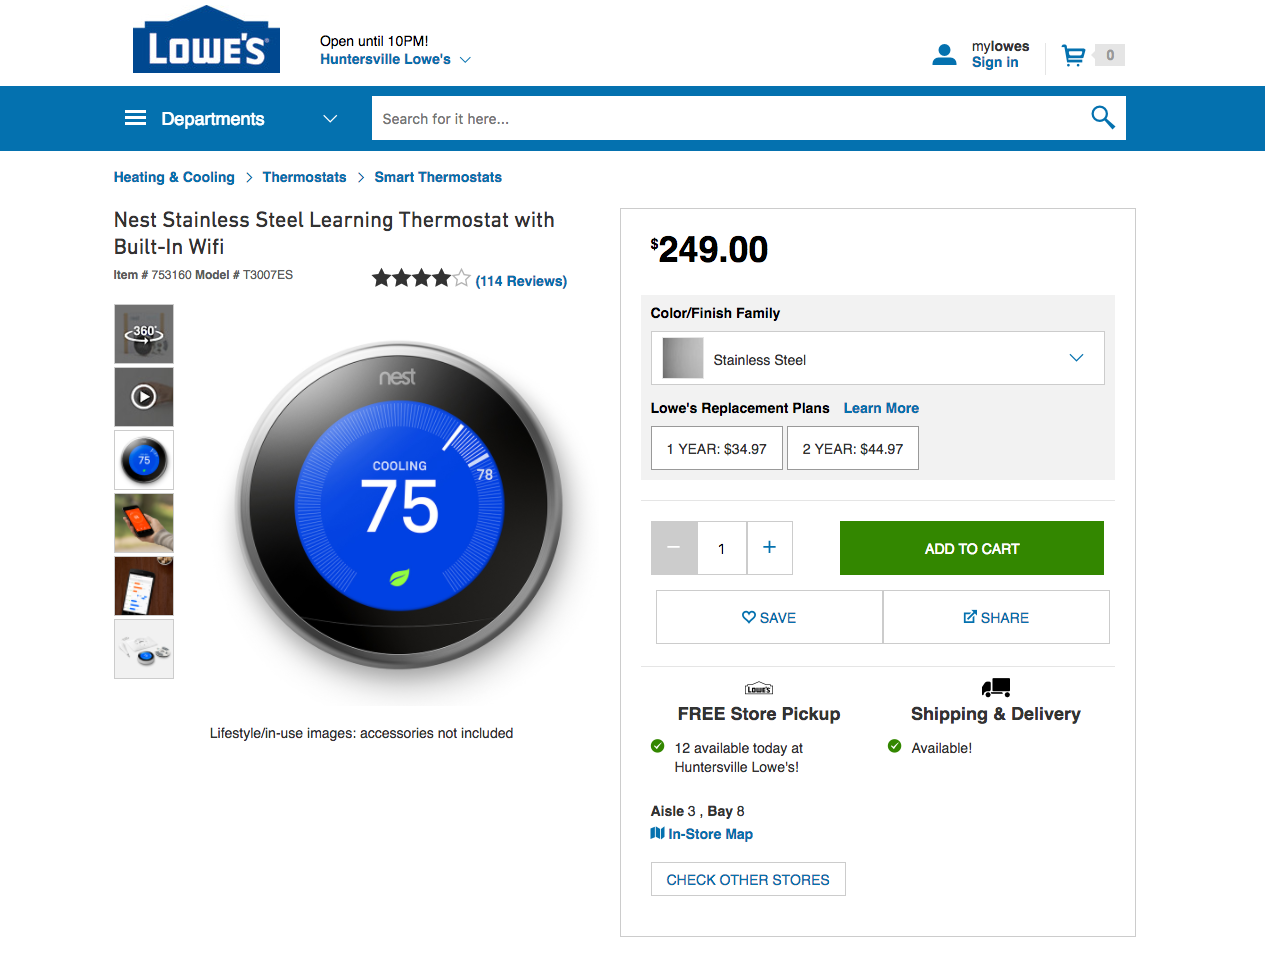 lowes.com Product Detail Page Screenshot circa 2017